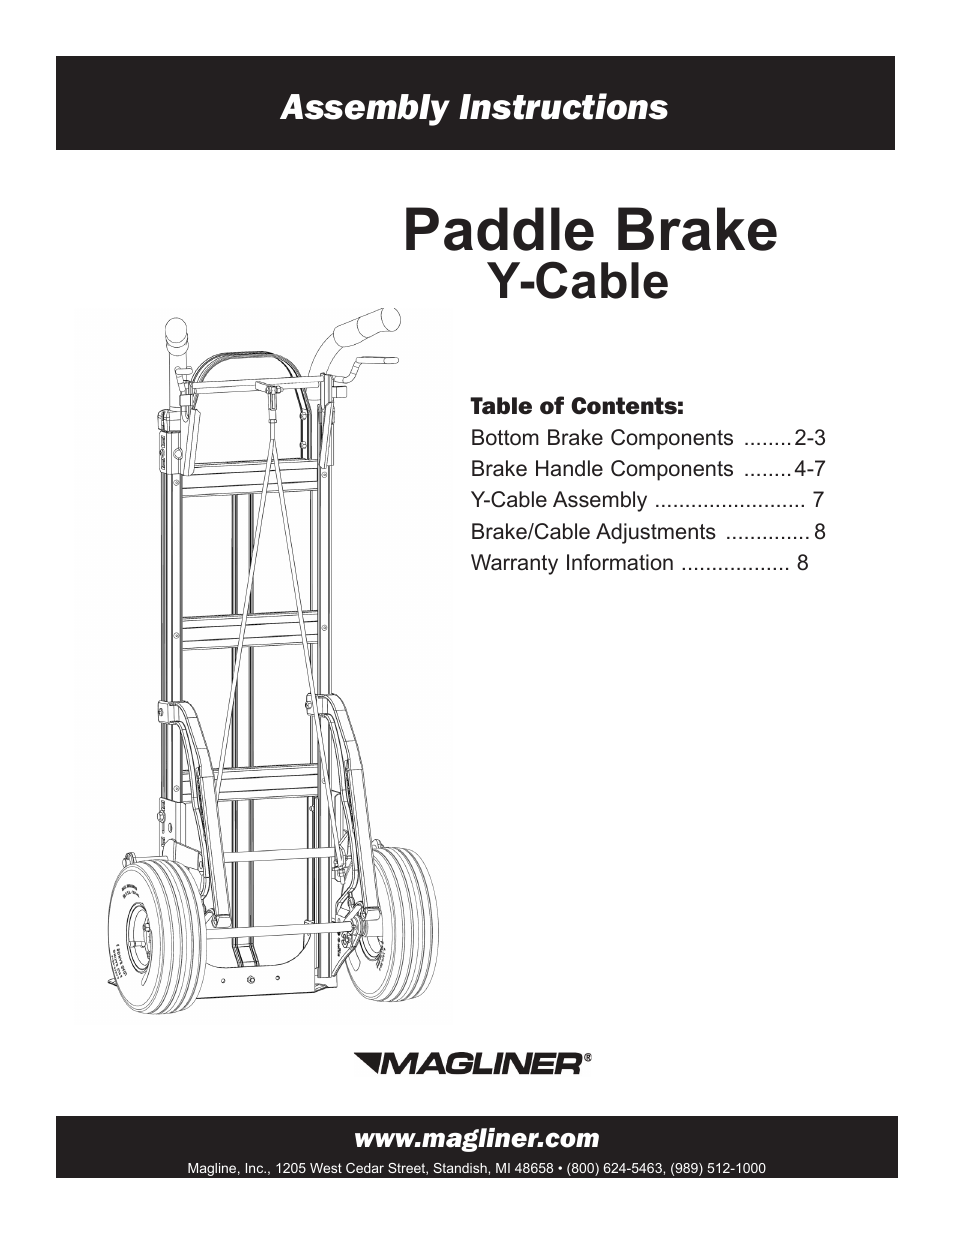 BRAKE TRUCK Y-Cable